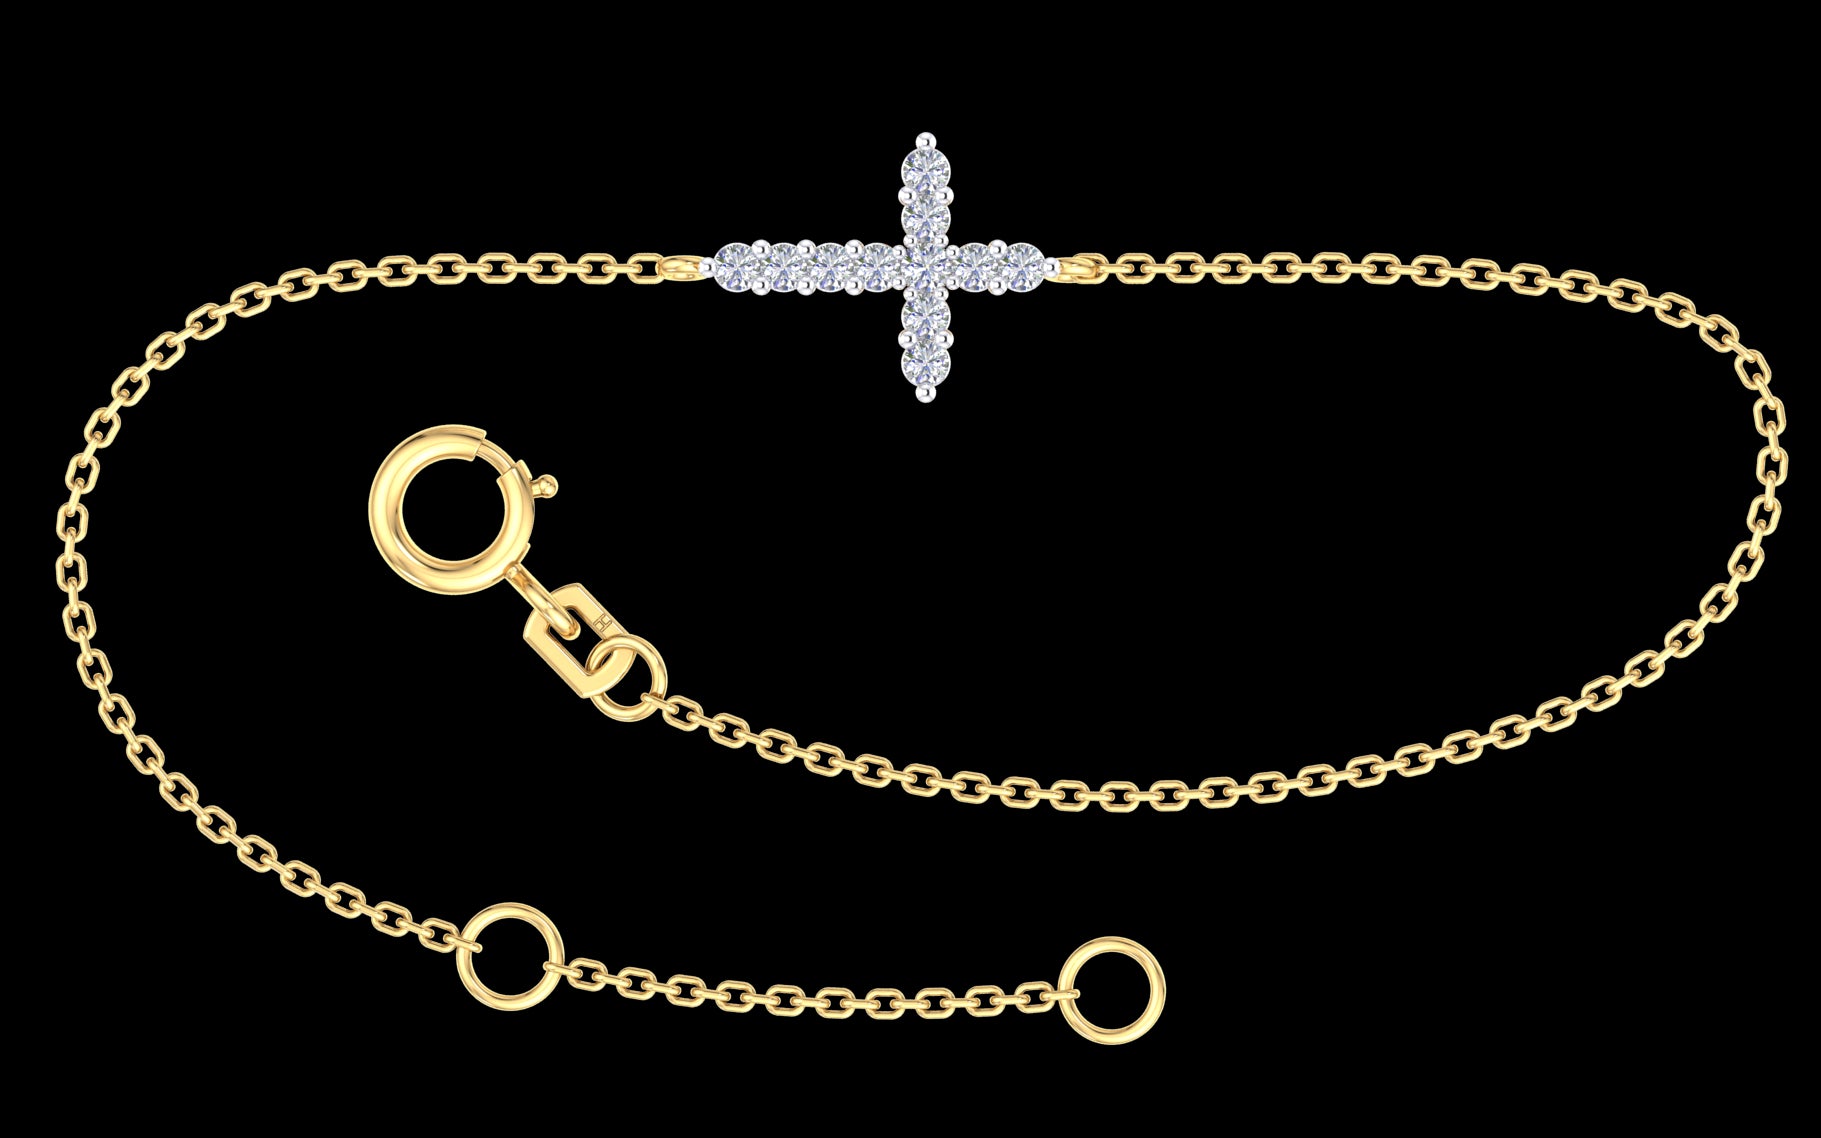 9k YG Oval link Bracelet with Diamond Cross. 19cm with Jump ring at 17cm. 11D=0.15ct)